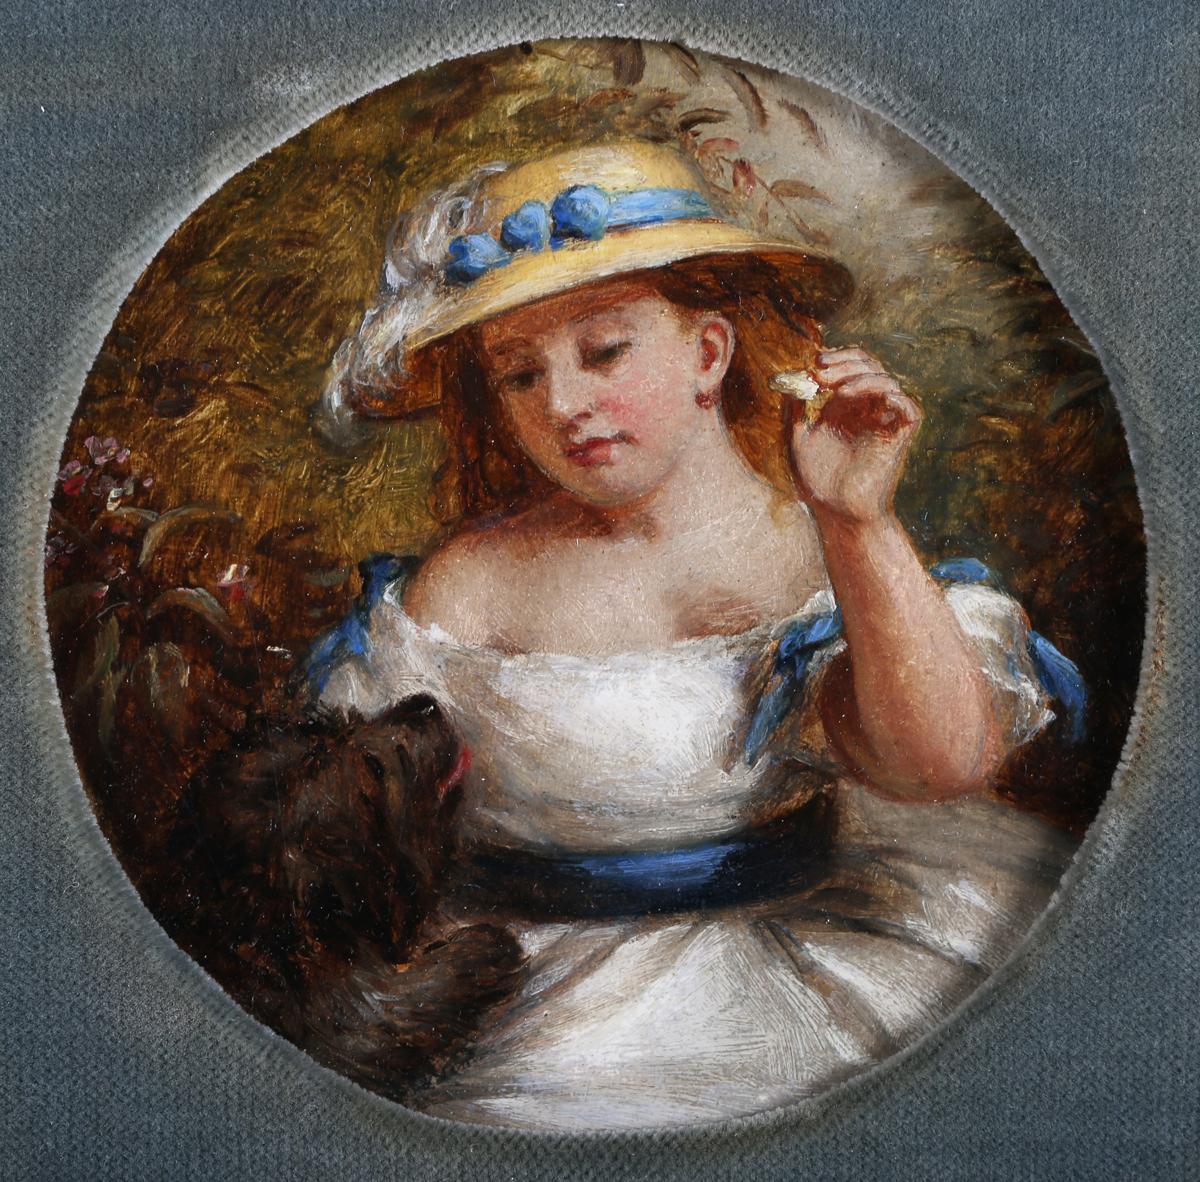 Animal Painting Arthur John Elsley - Fine Victorian Oil Painting Young Girl with Pet Dog Circular Original 19th cent.